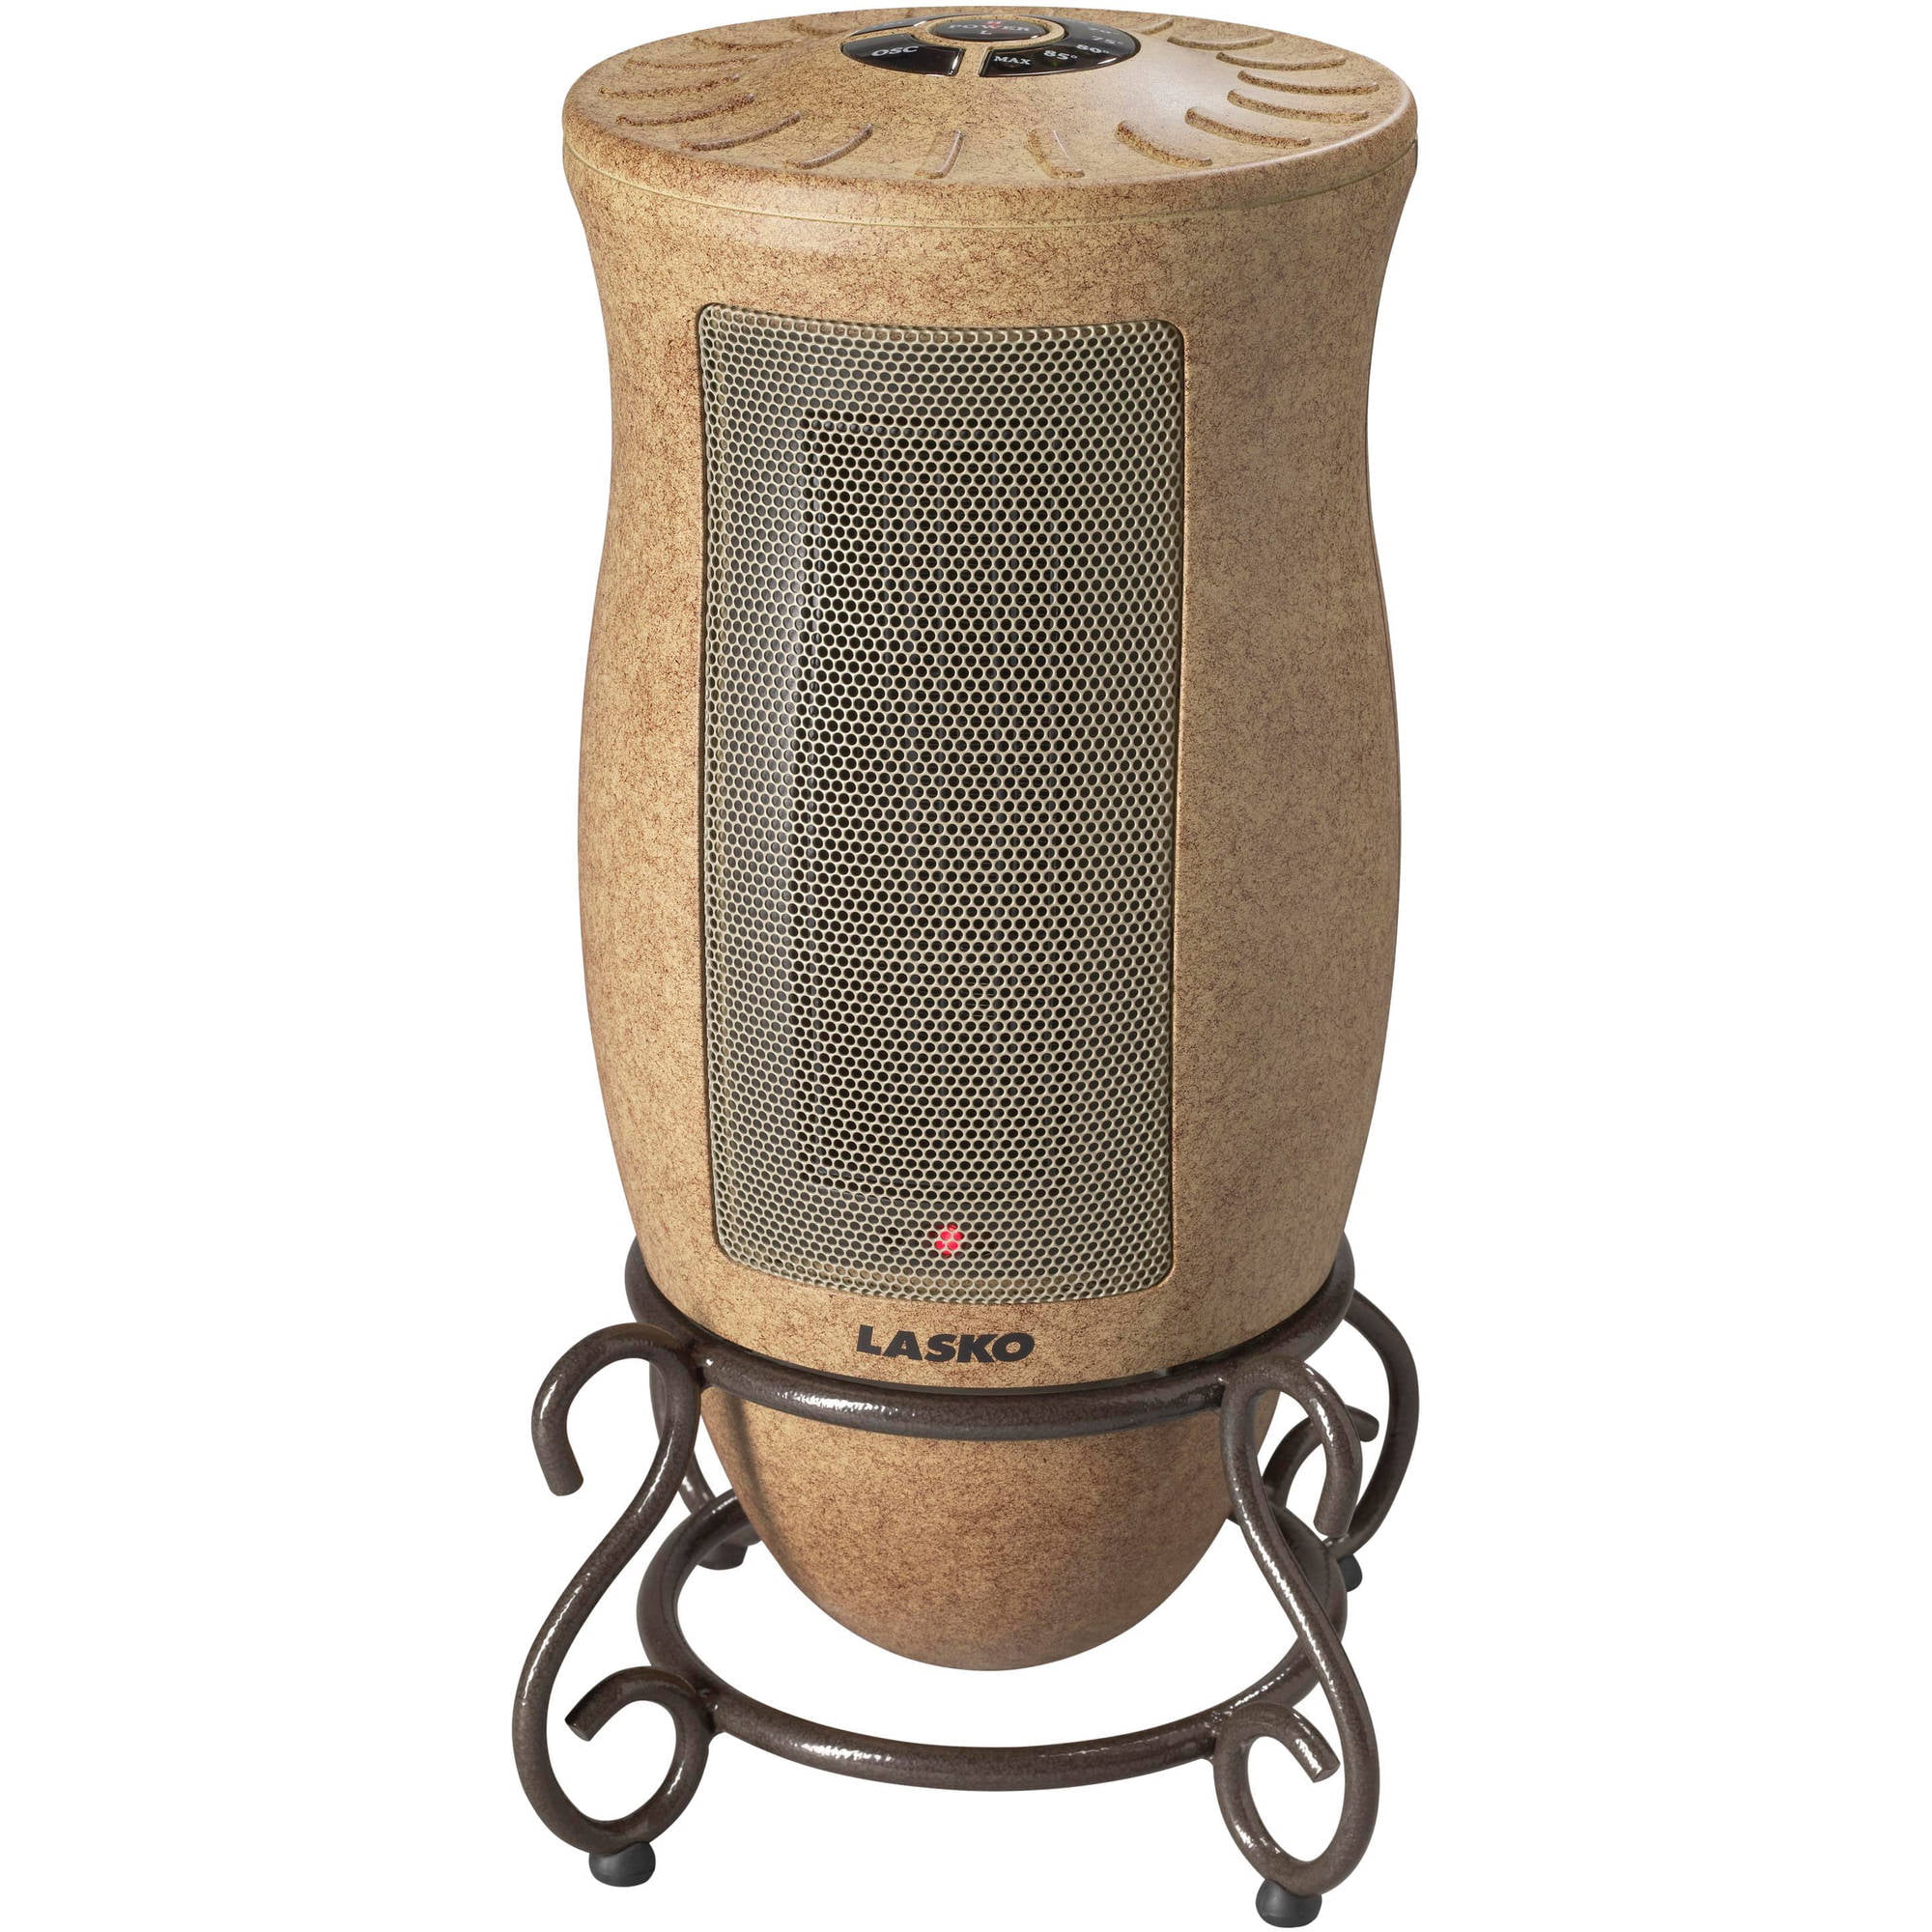 Health Advantages Of Infrared Portable Heaters